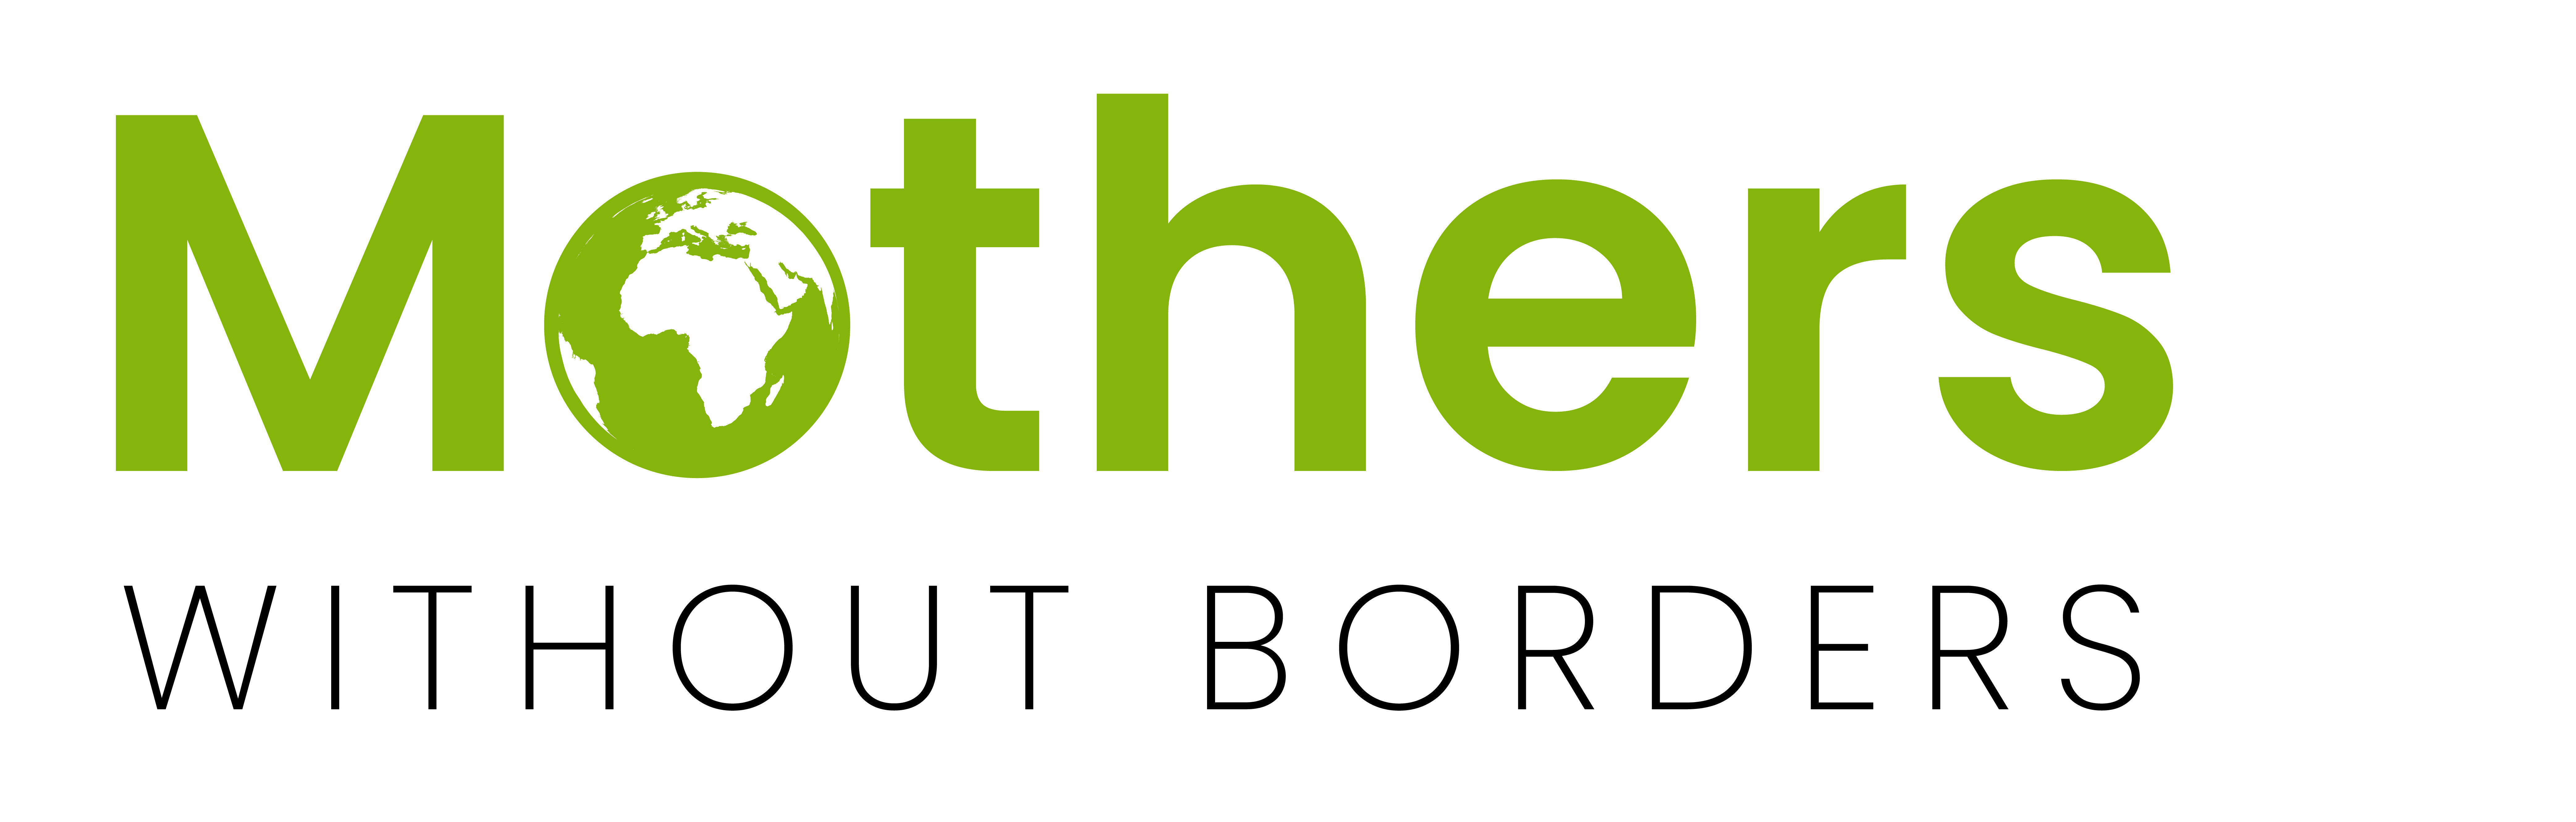 Mothers Without Borders logo.